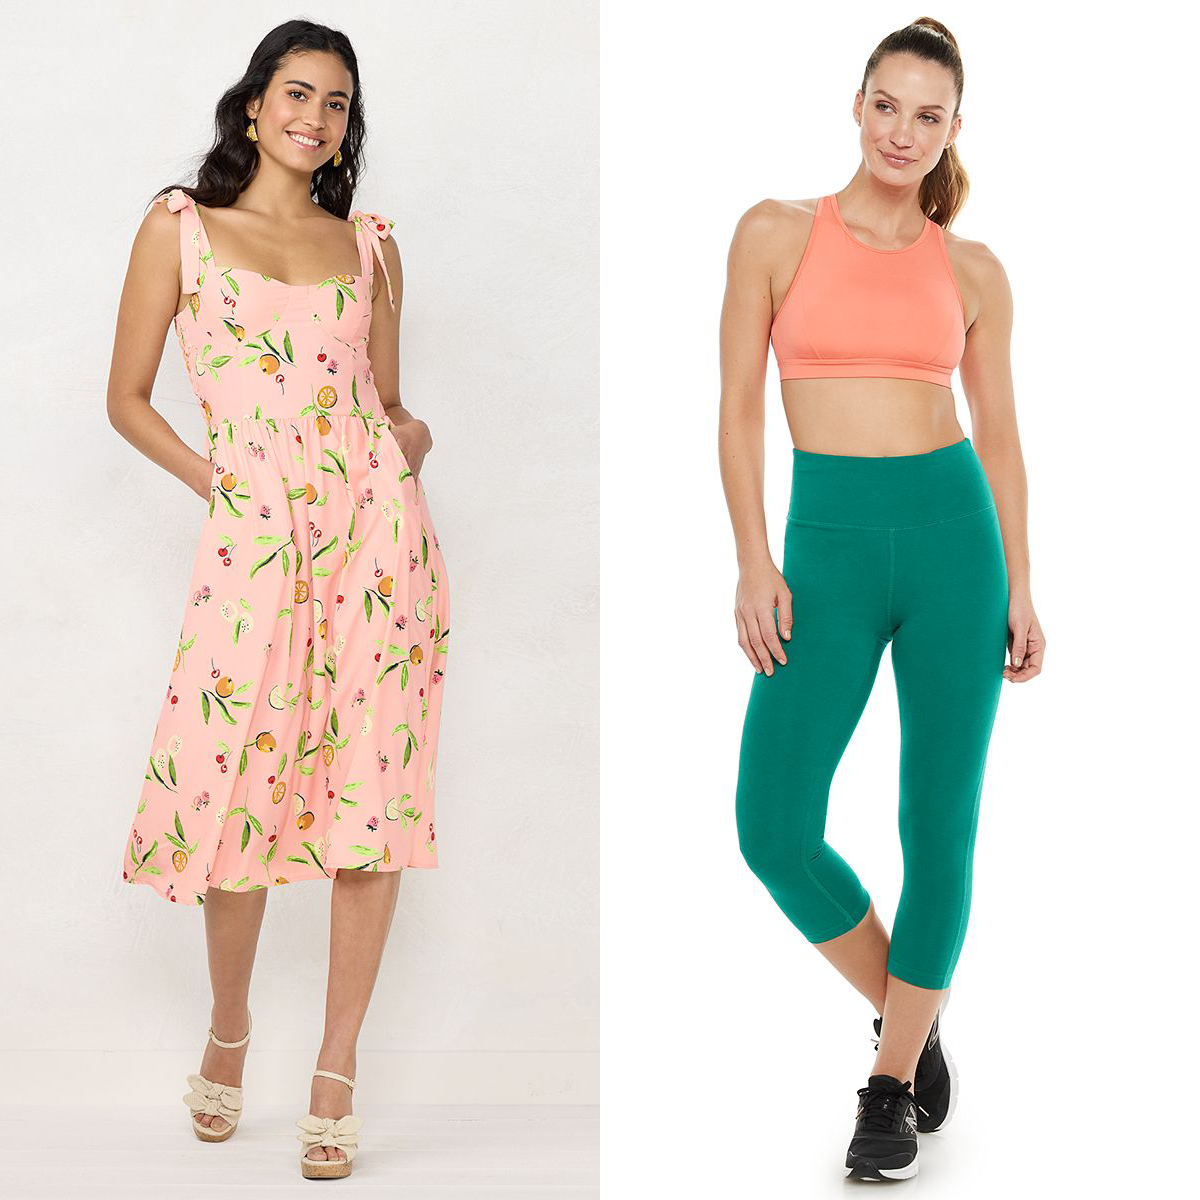 Women's Clothing Sale & Clearance